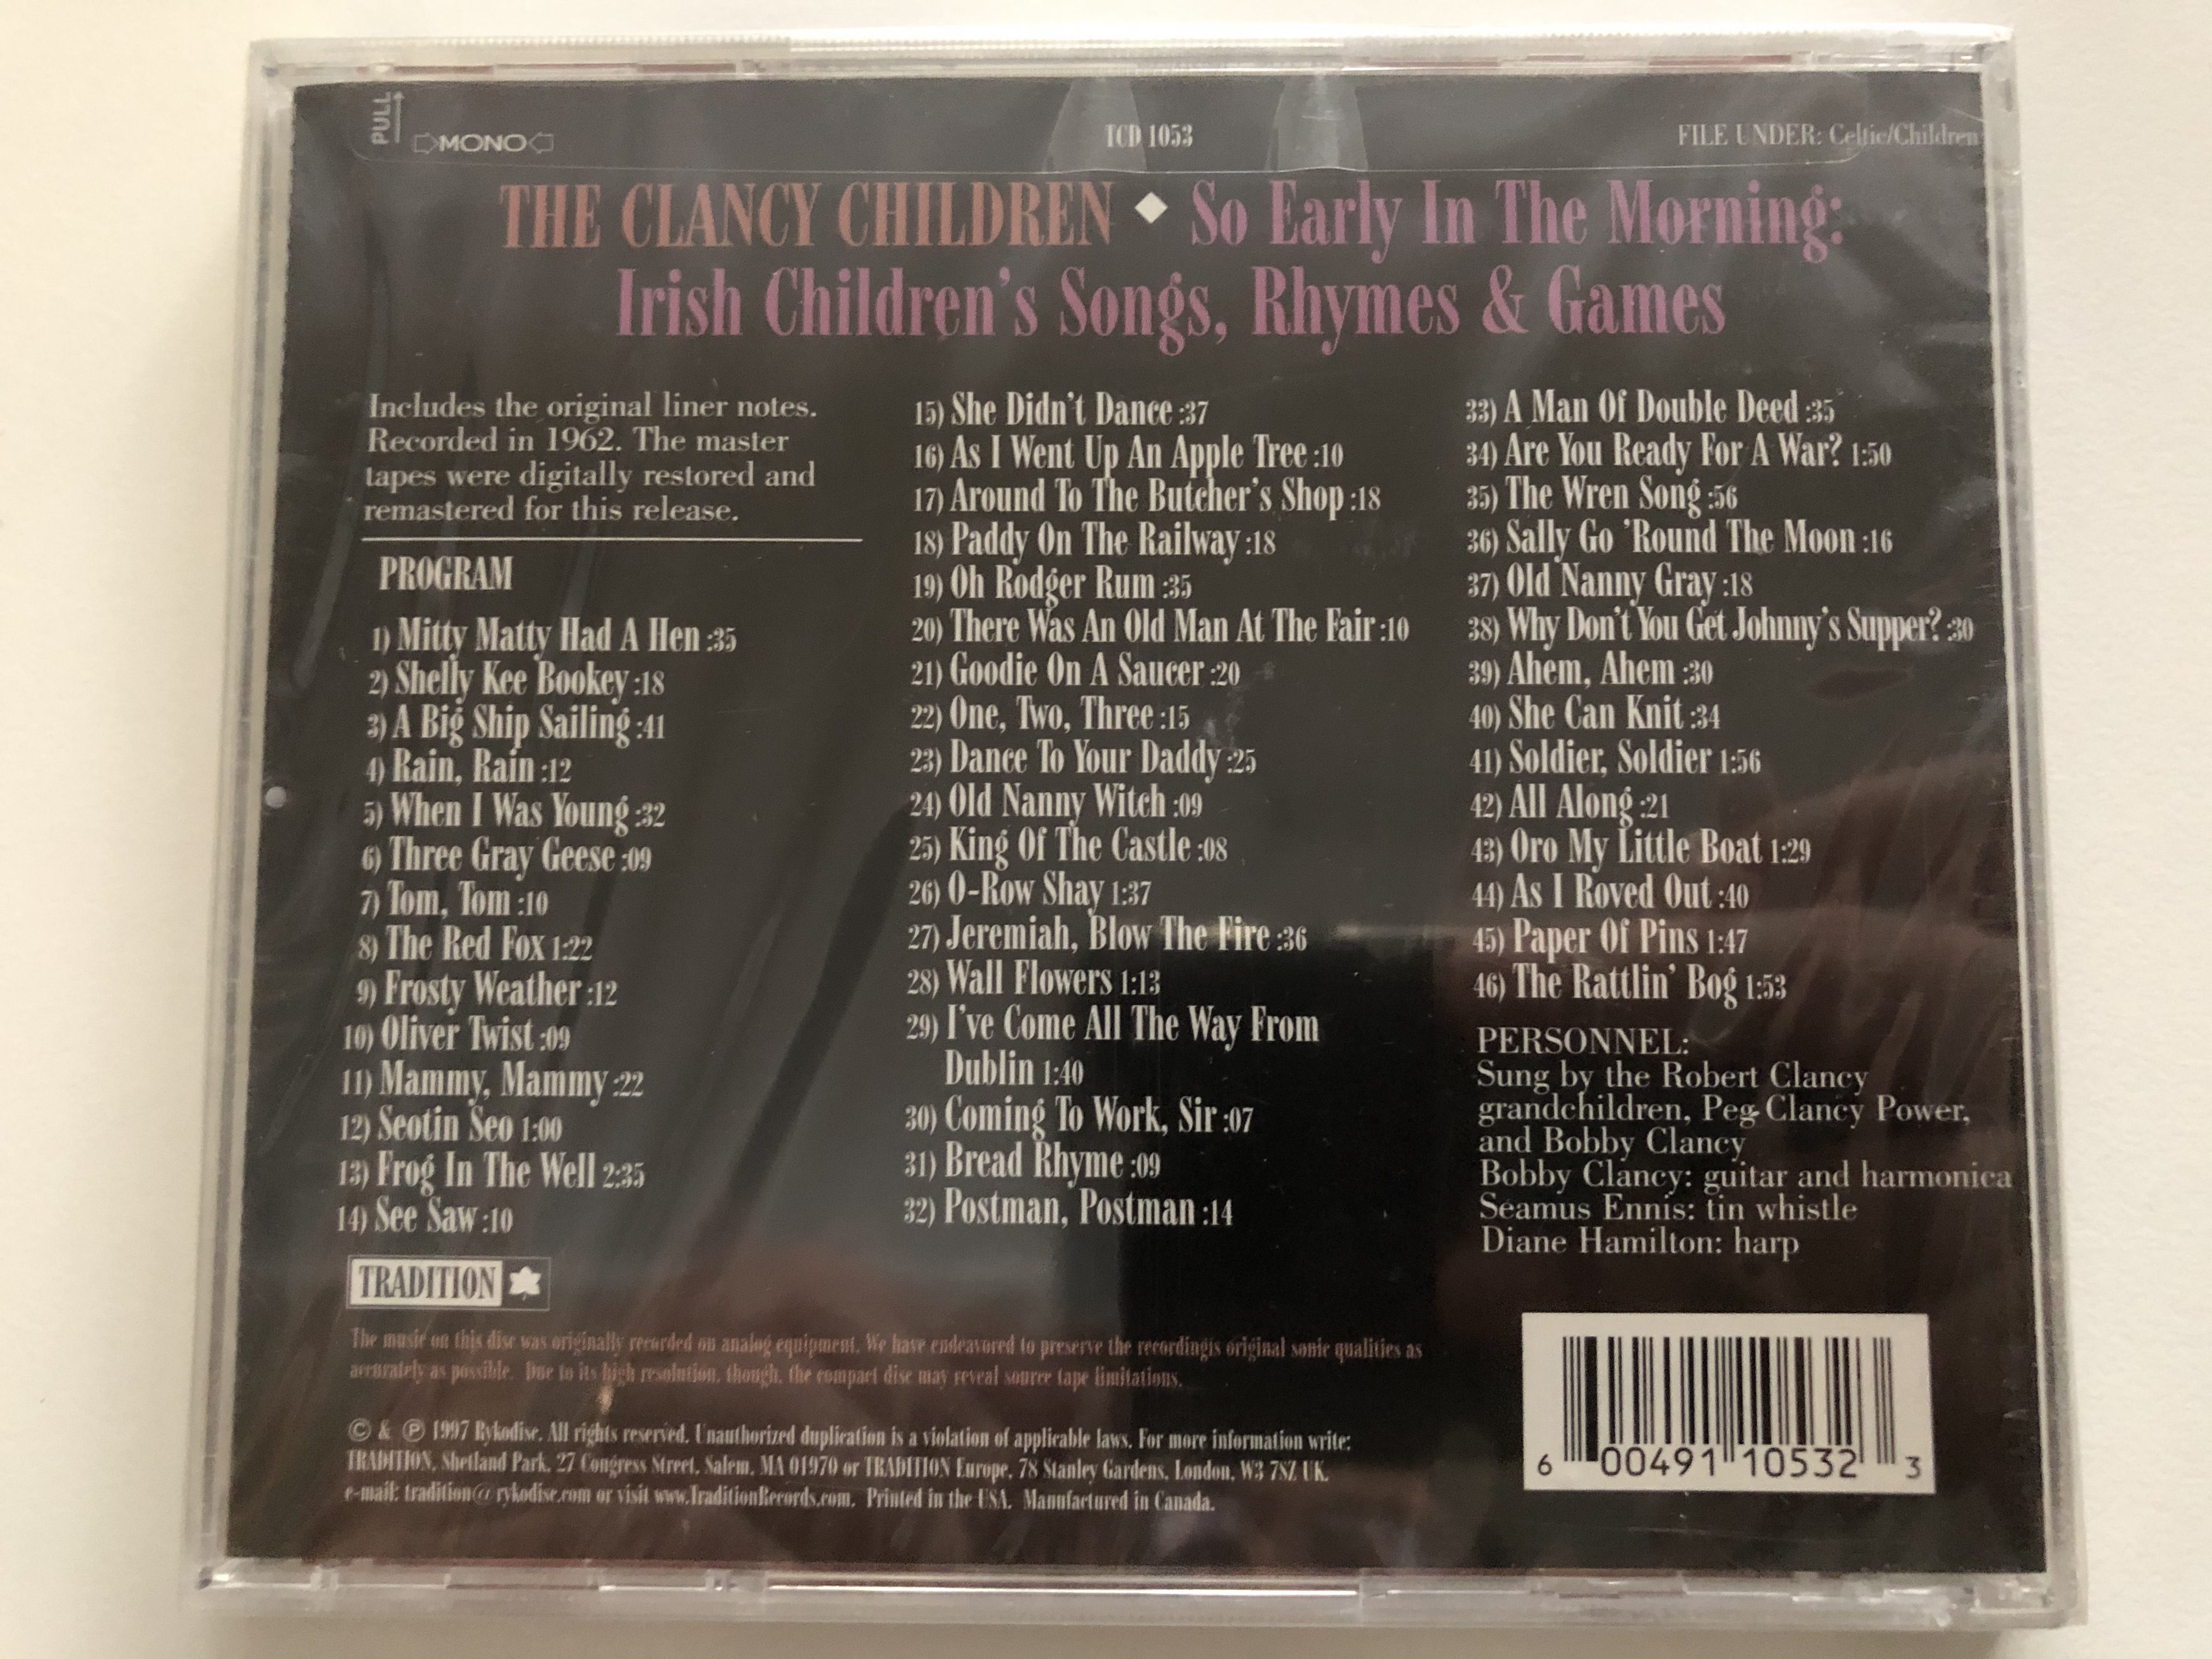 the-clancy-children-so-early-in-the-morning-irish-children-s-songs-rhymes-games-tradition-audio-cd-1997-tcd-1053-2-.jpg